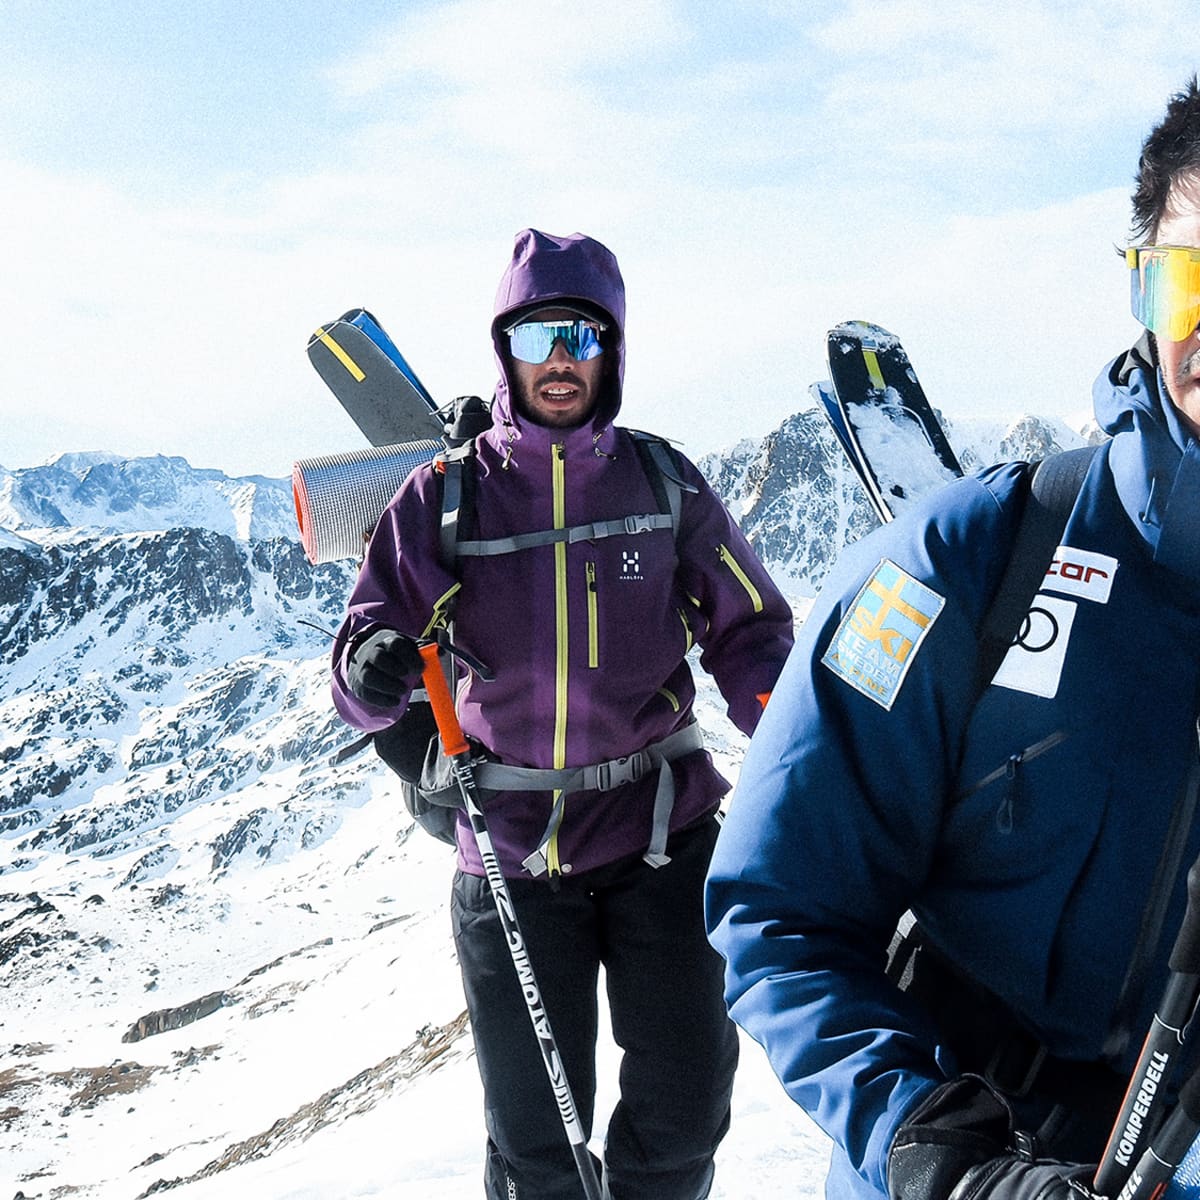 The best sports sunglasses for skiing